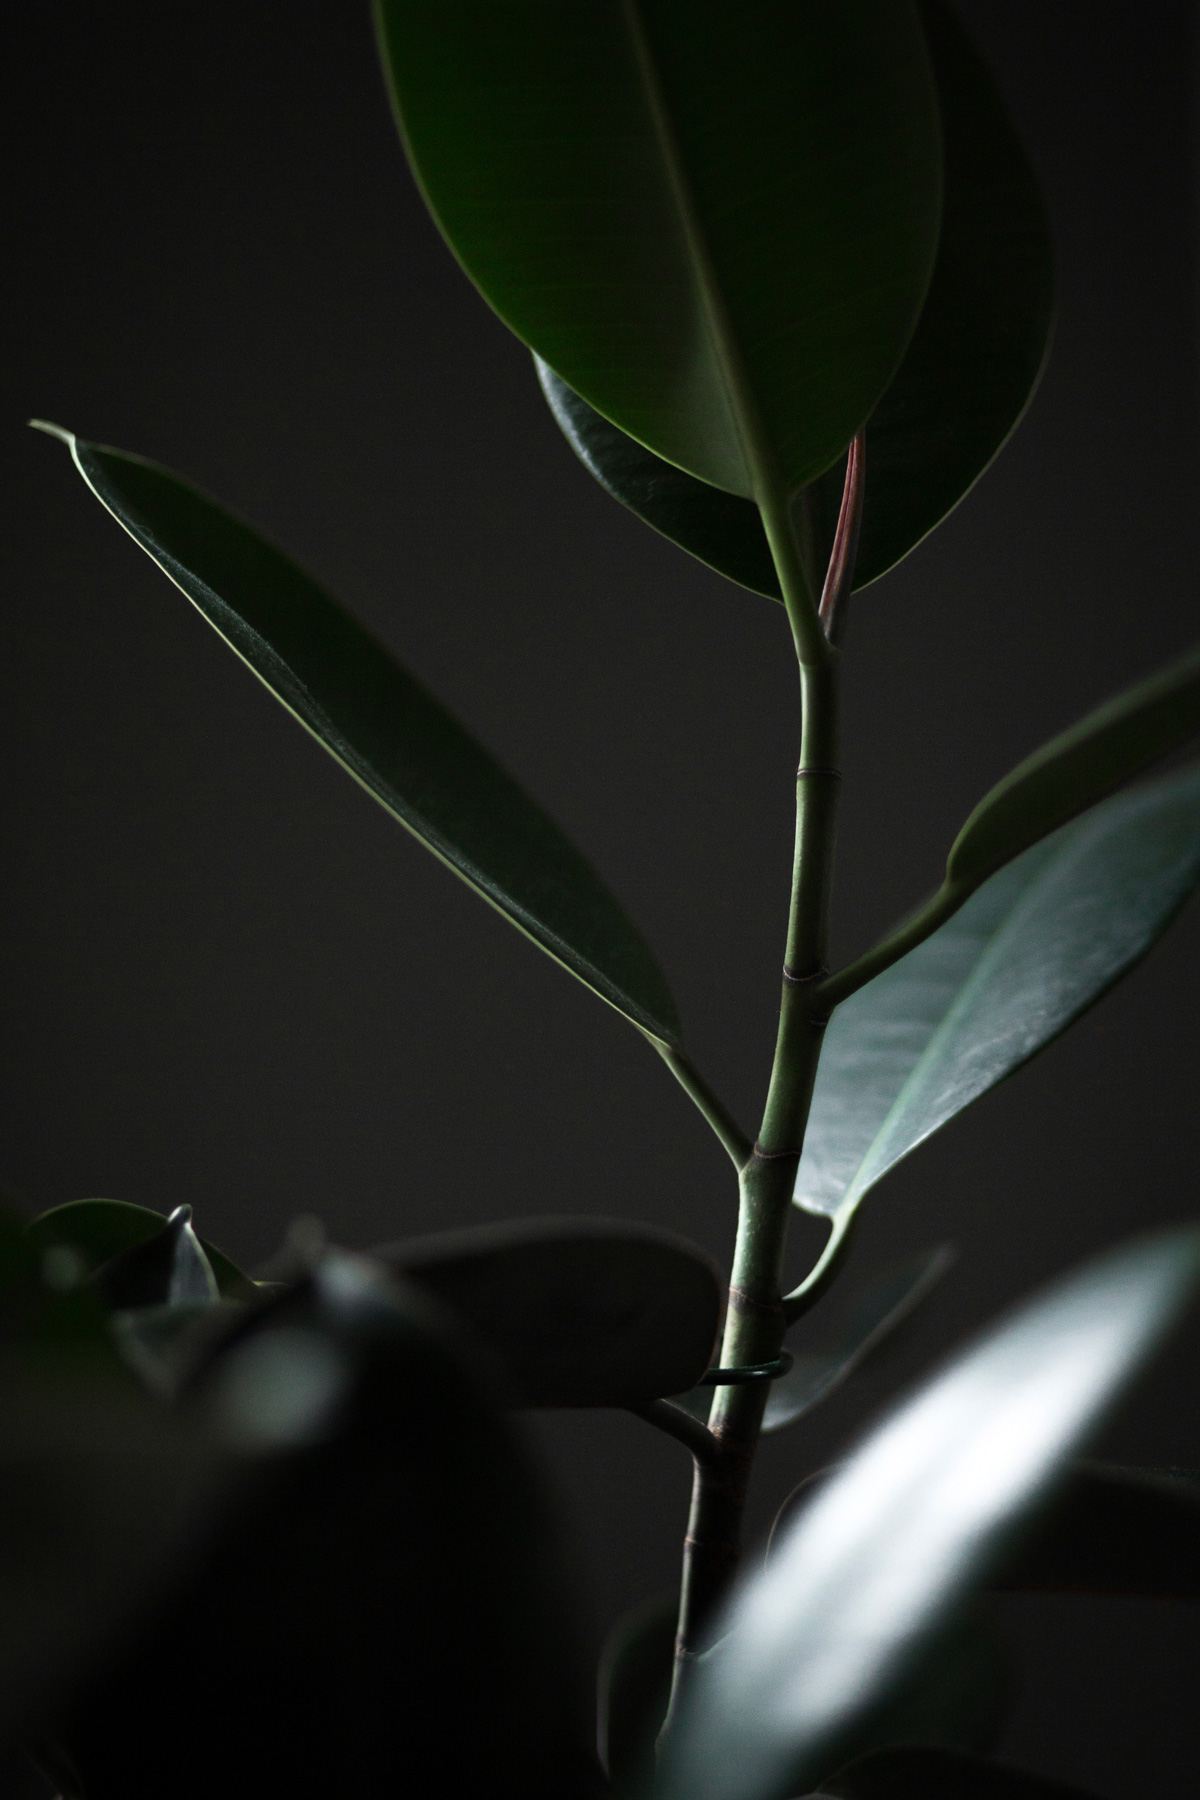 A close up photo of an indoor plant with large leaves